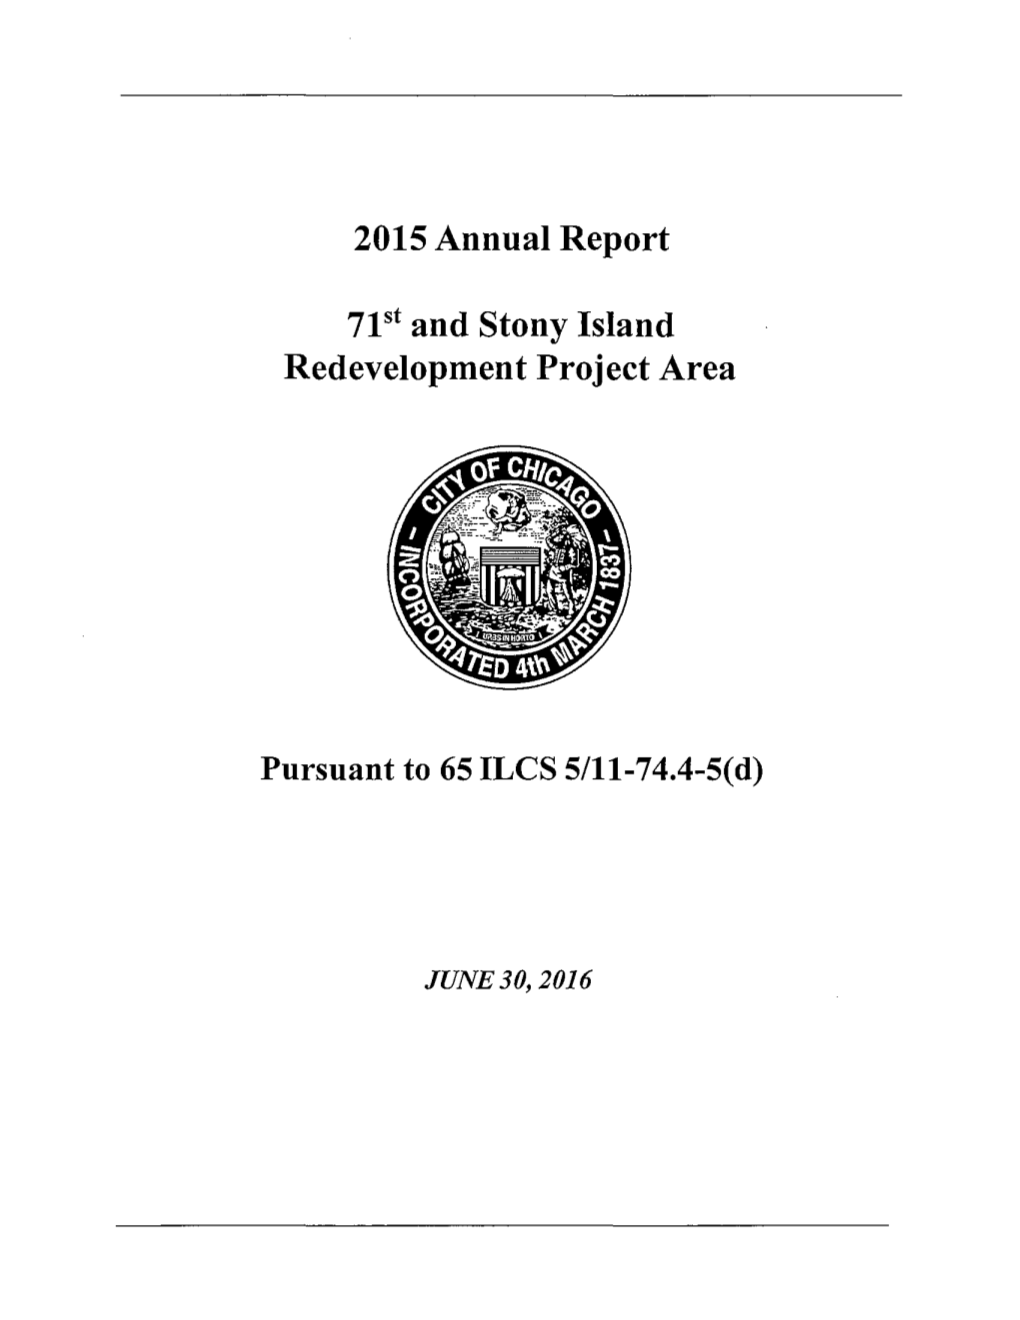 2015 Annual Report 71 St and Stony Island Redevelopment Project Area